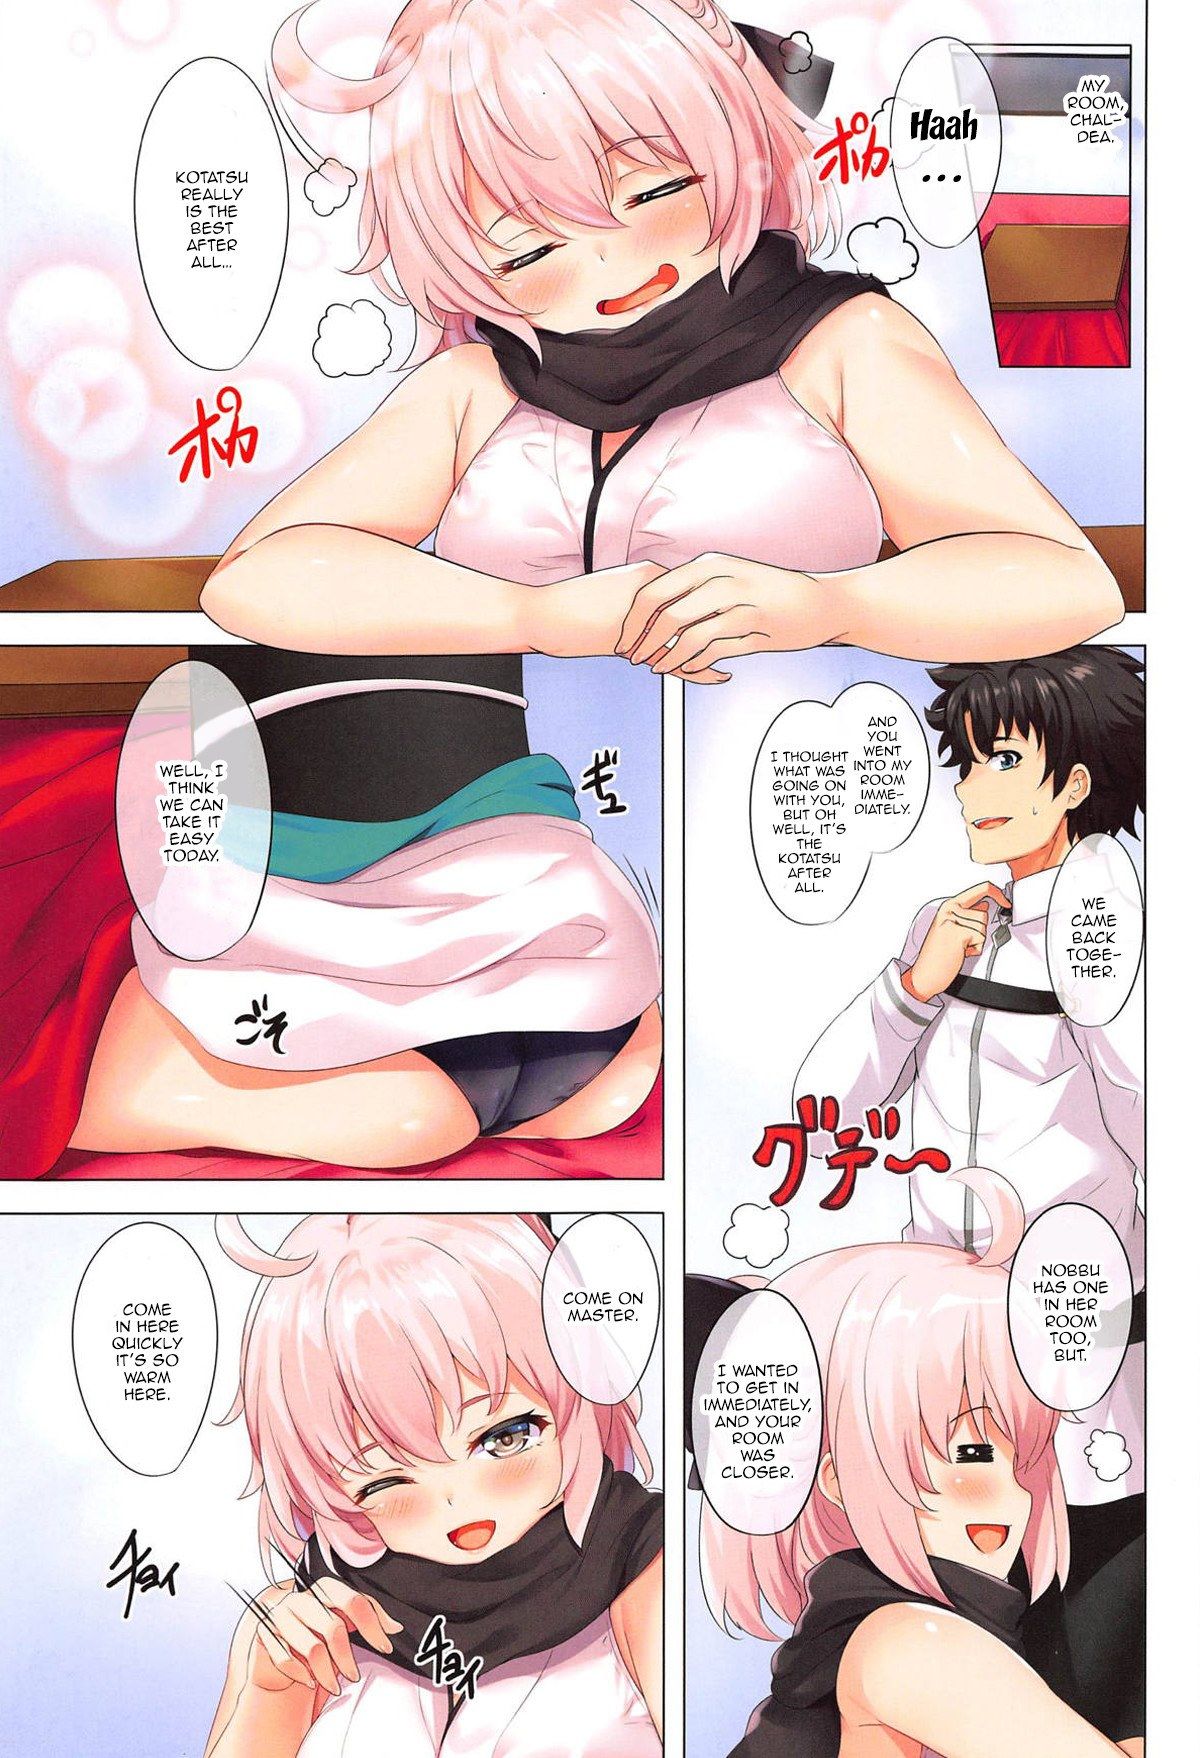 Warming Up With Okita San by Soramoti (Fate Grand Order) page 2